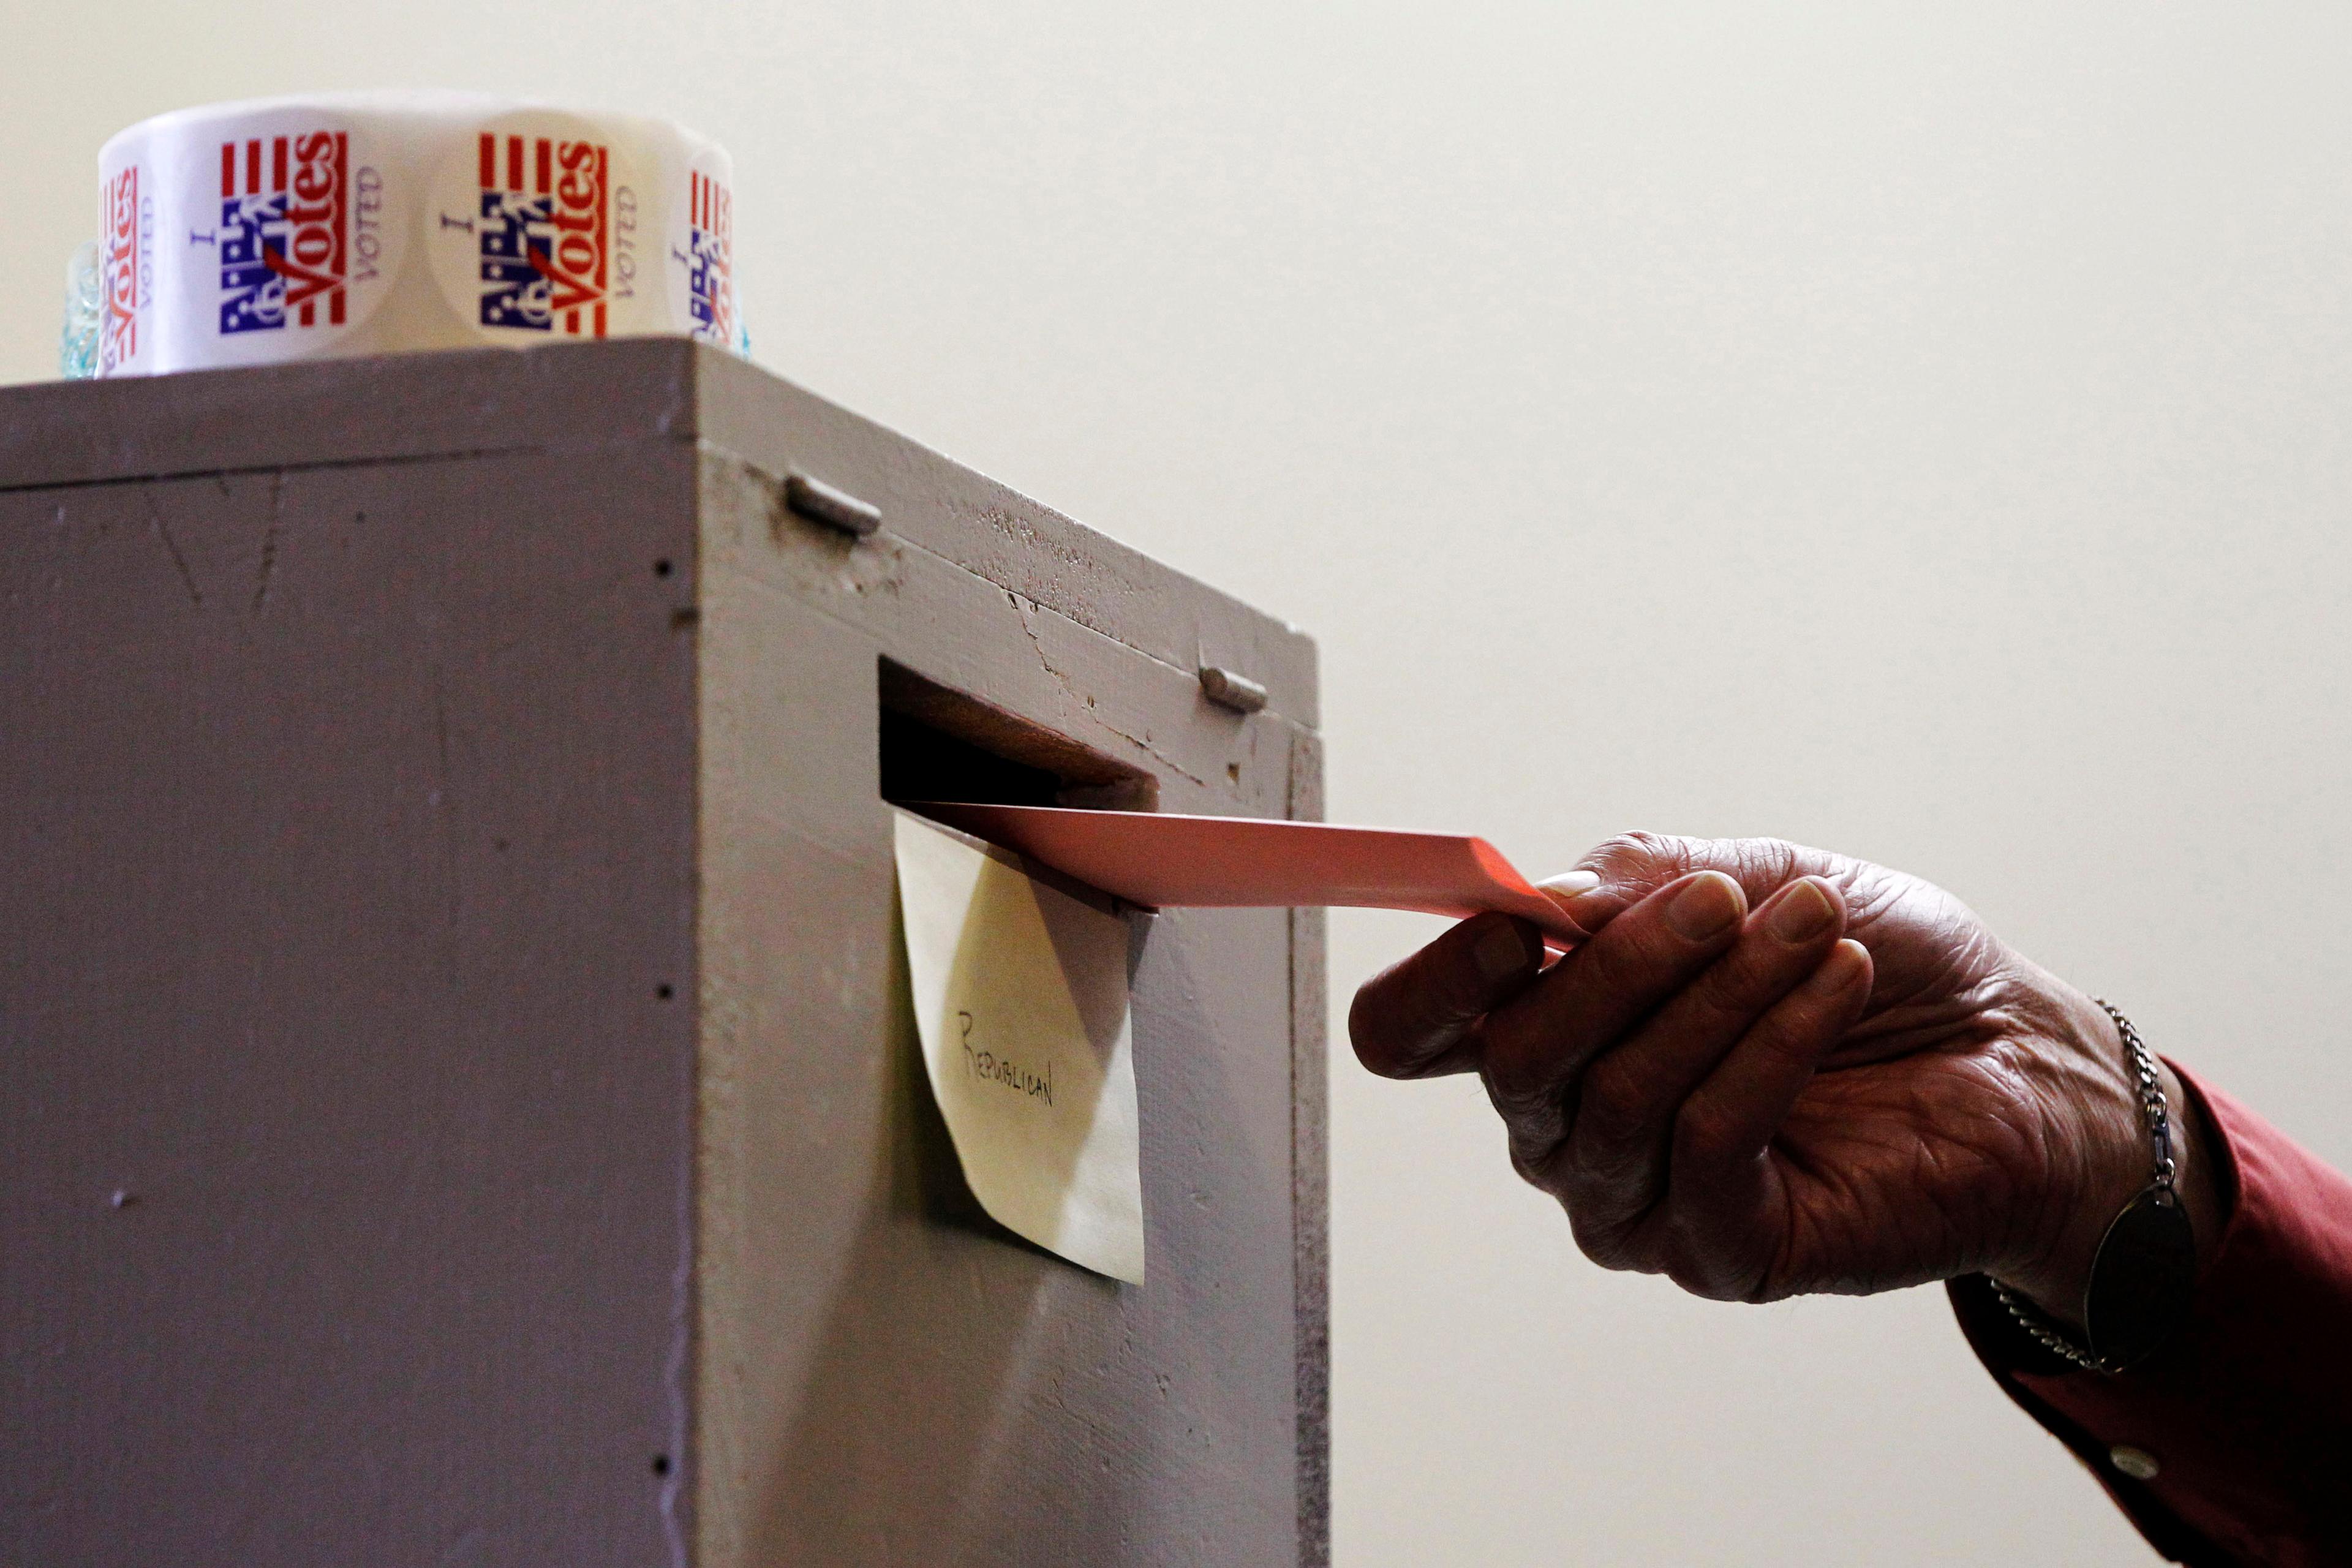 Photo: Casting ballot in 2012 primary (AP Photo)